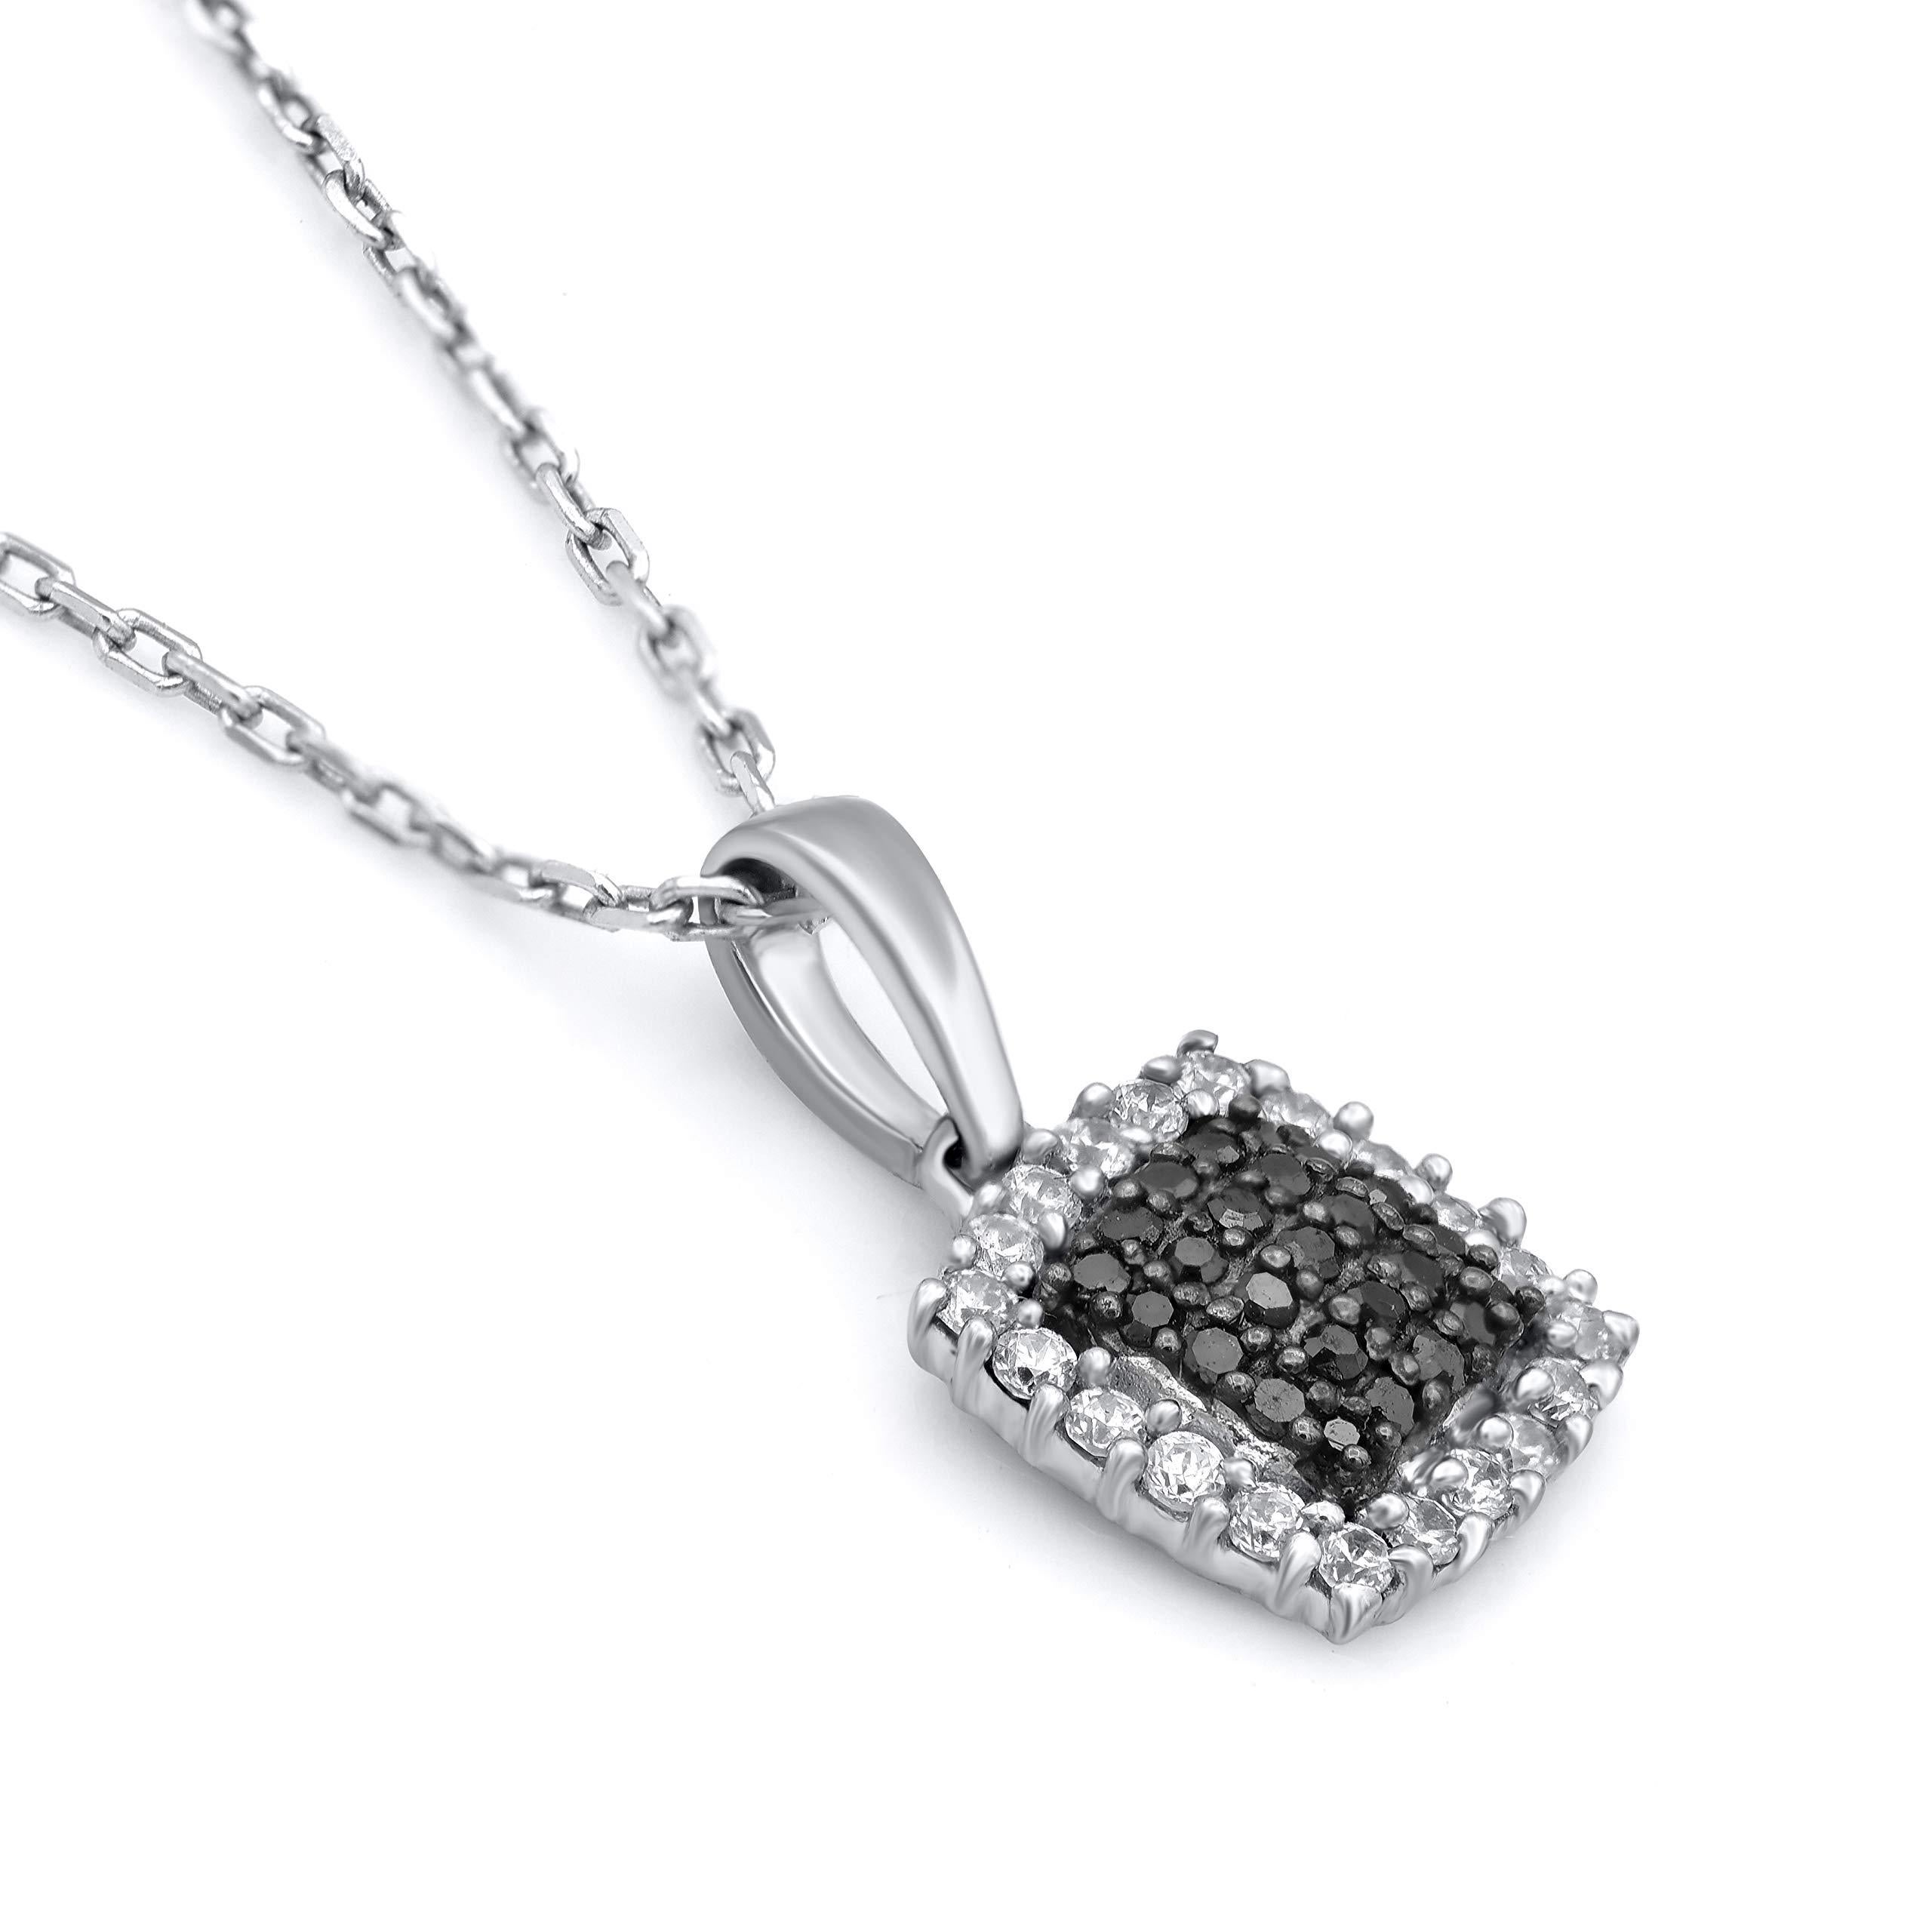 Top off your casual or dressy looks with this diamond pendant. Designed in 14 Karat white gold, studded with 45 brilliant cut & black treated diamonds in prong setting. it will come along with a cable chain. The diamonds are graded H-I Color, I2